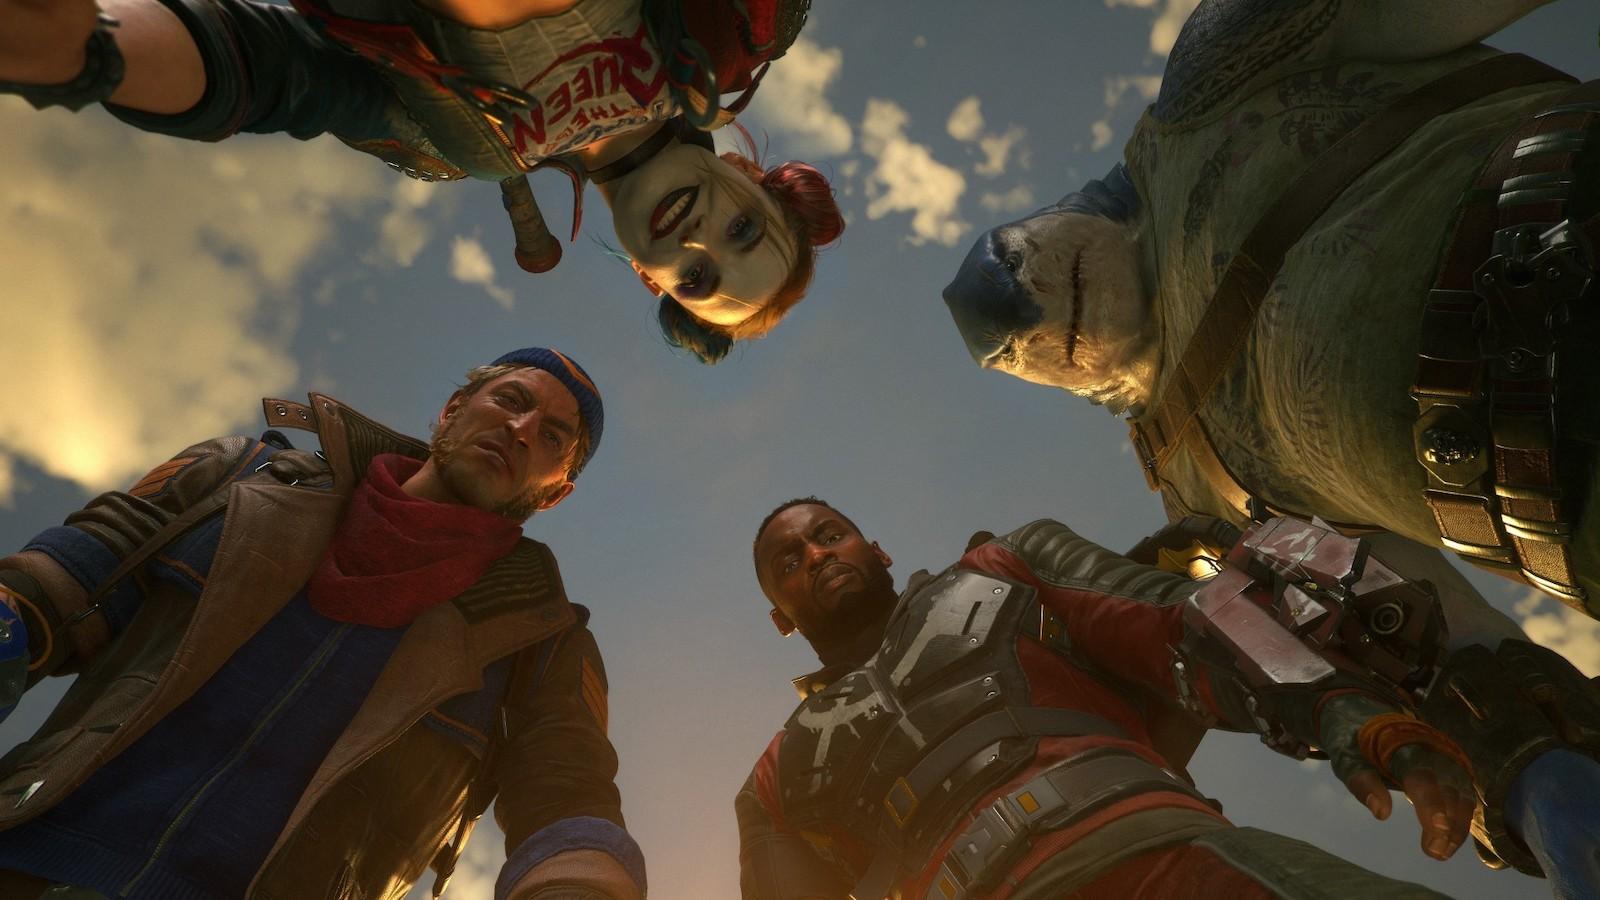 Suicide Squad characters looking down at camera